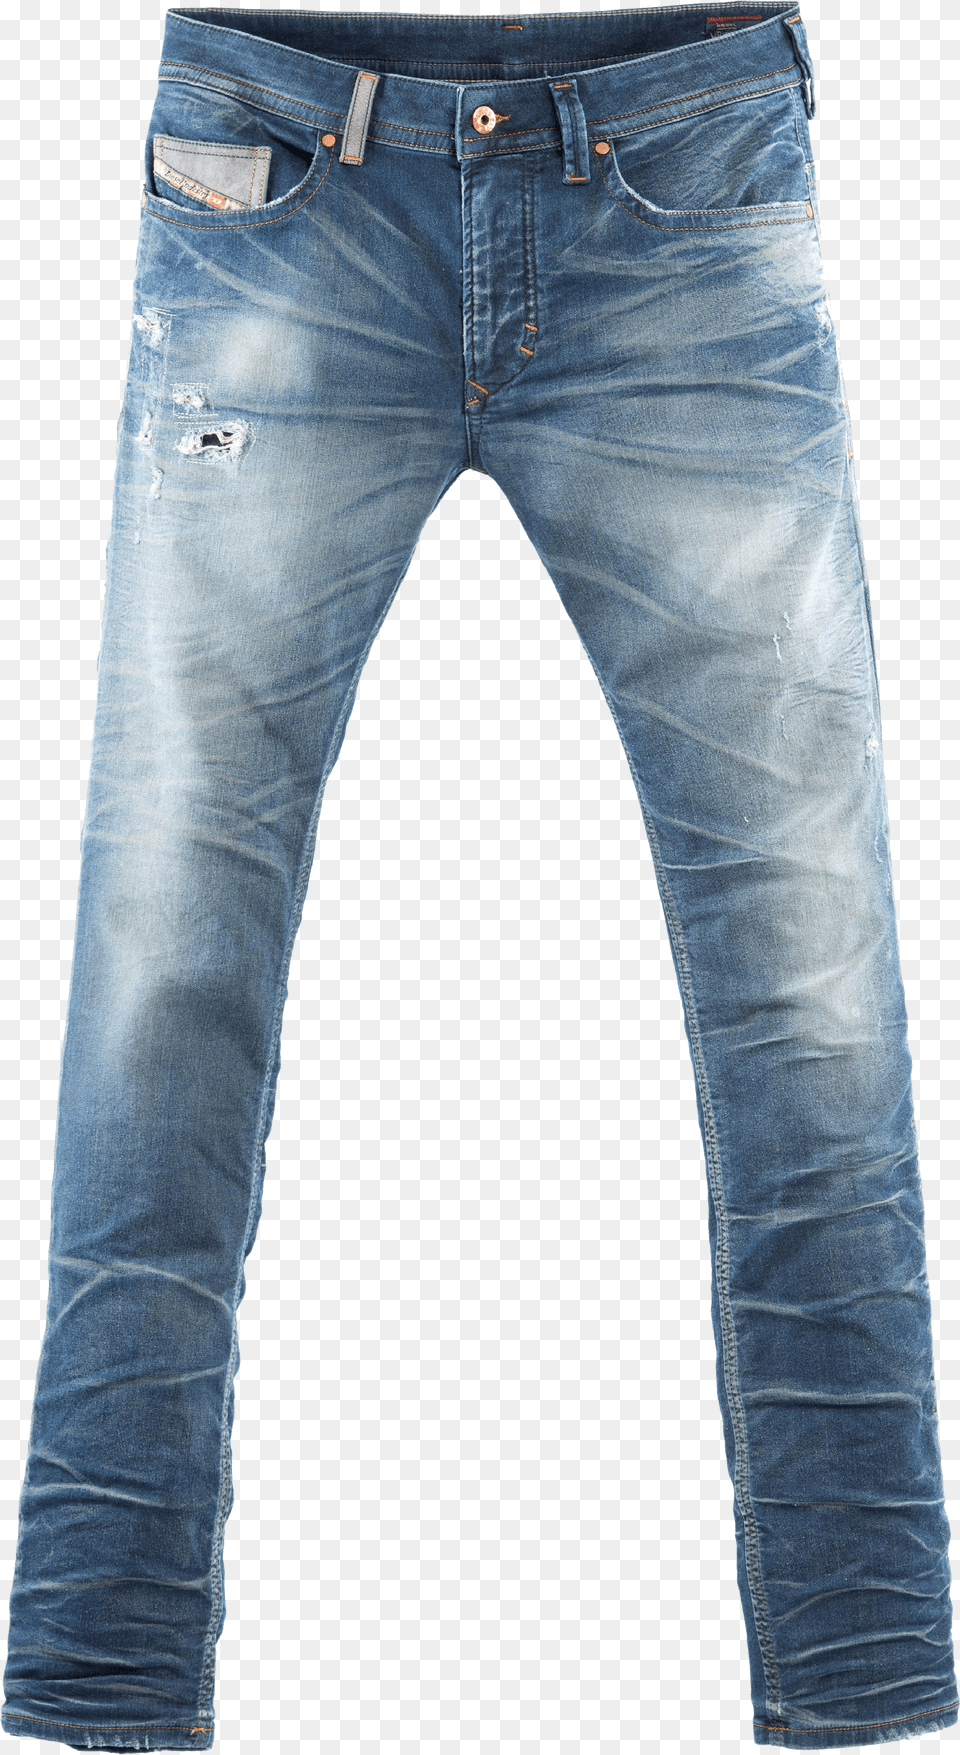 Pant Hd Jeans Png